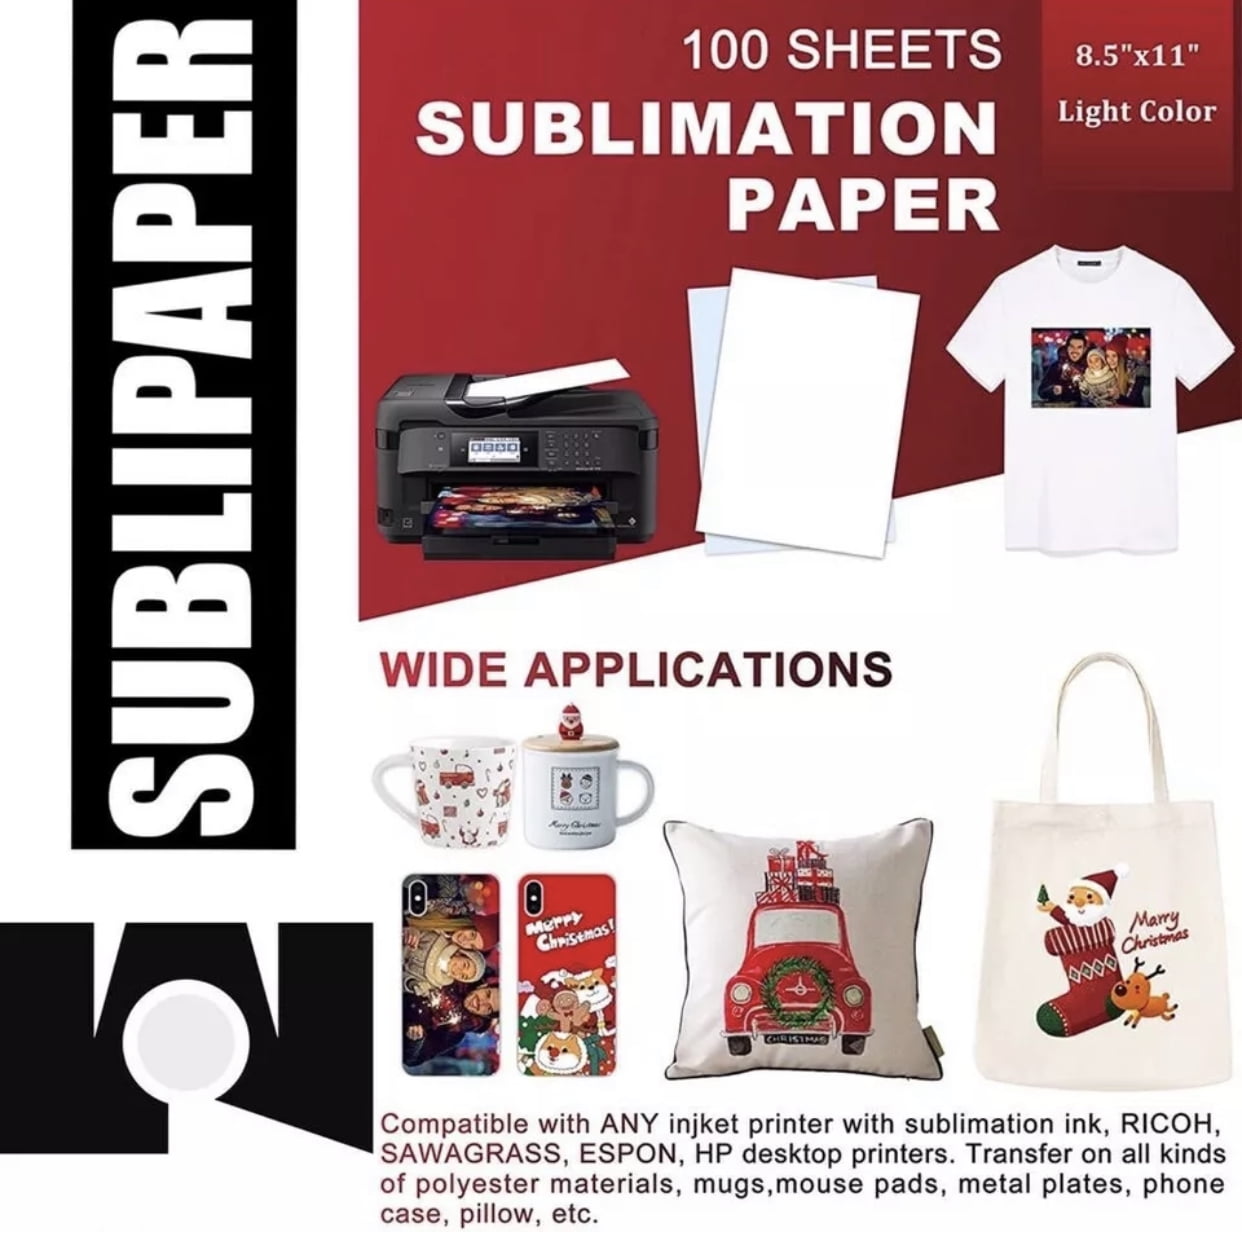 A-SUB Sublimation Paper 13x19 Inch for DIY Unique Christmas Gifts  Compatible with Inkjet Printer which Match Sublimation Ink 100 Sheets